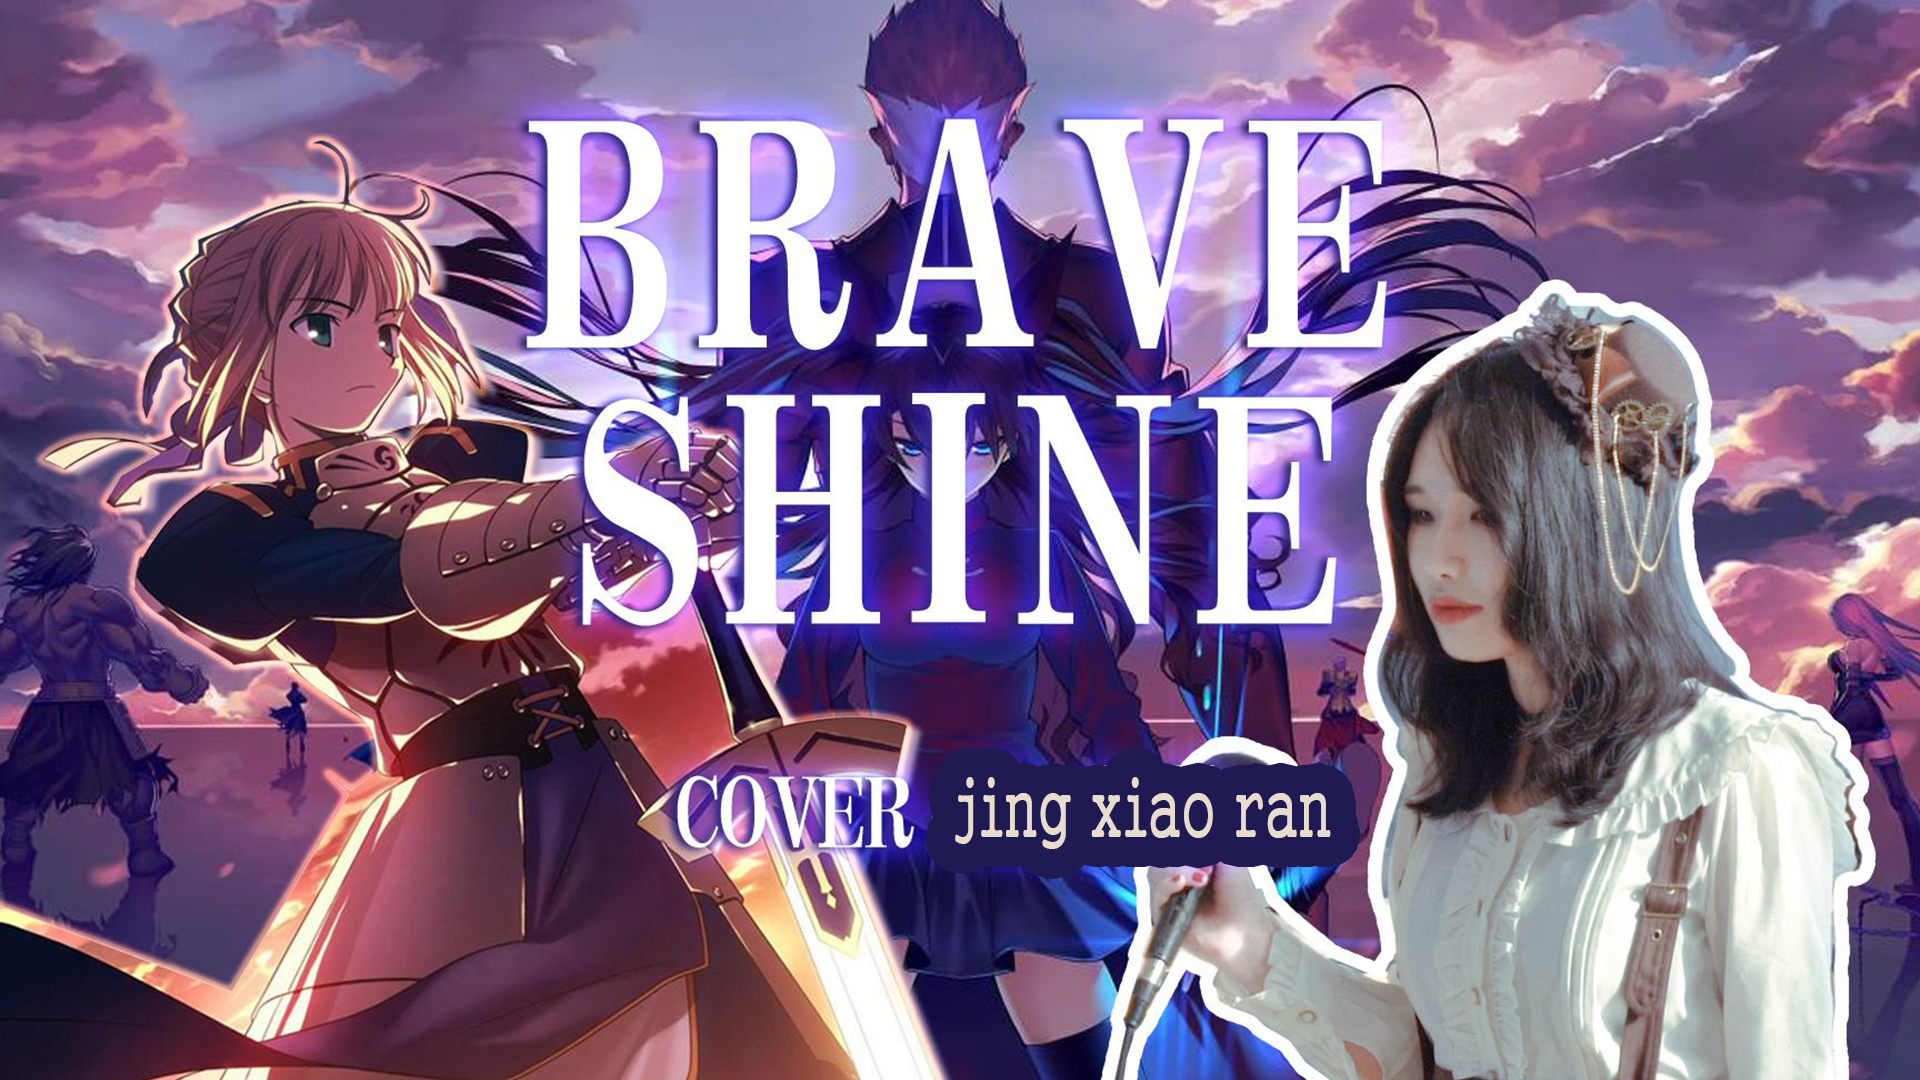 Brave Shine 8Bit Version  Song Download from Fate  Stay Night  Reincarnation  JioSaavn